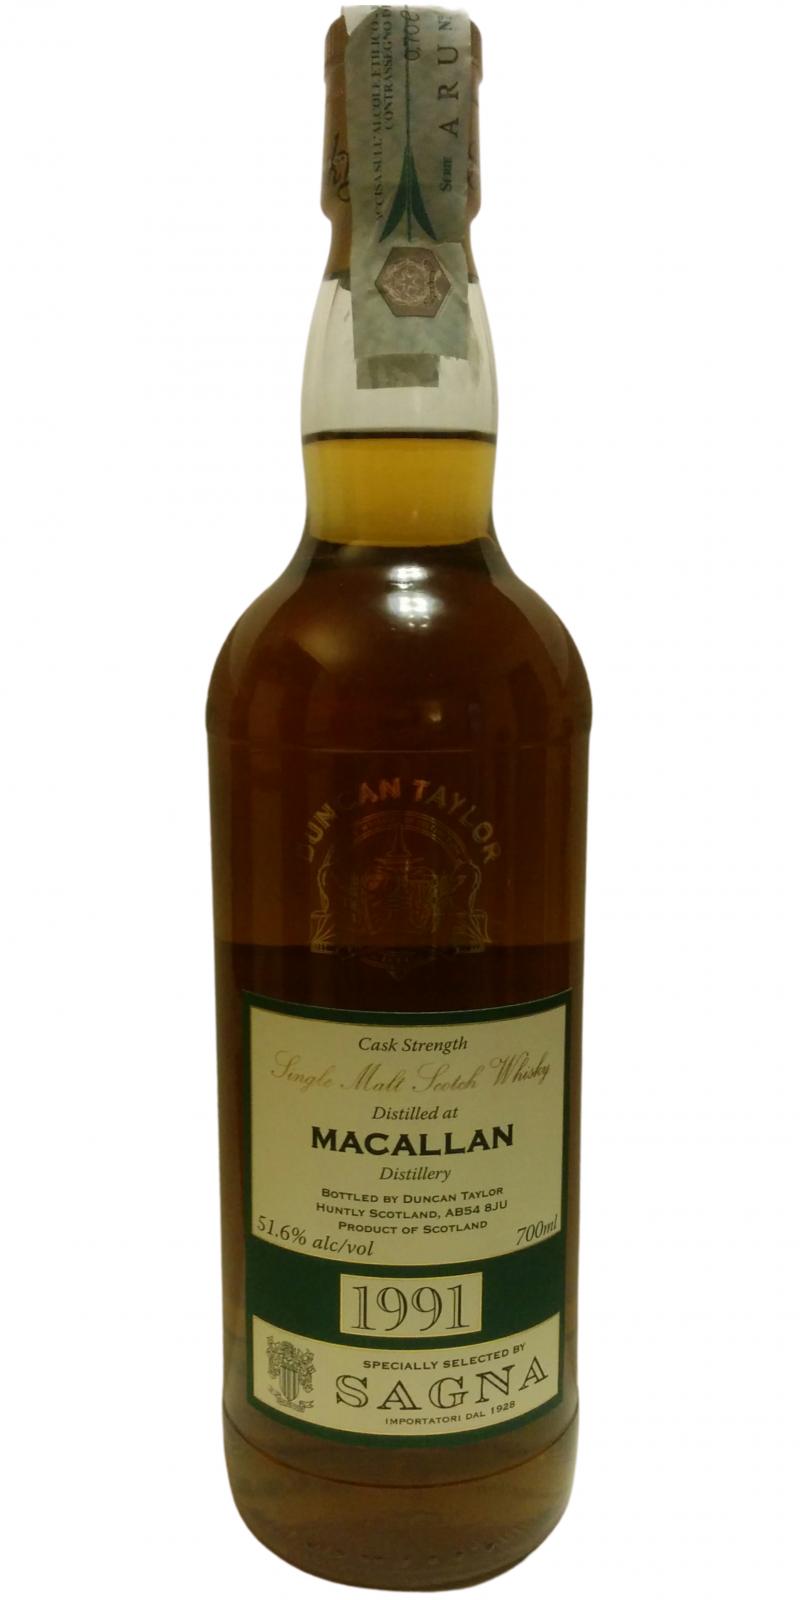 Macallan 1991 DT The Octave Collection Sherry 7128 Sagna 51.6% 700ml